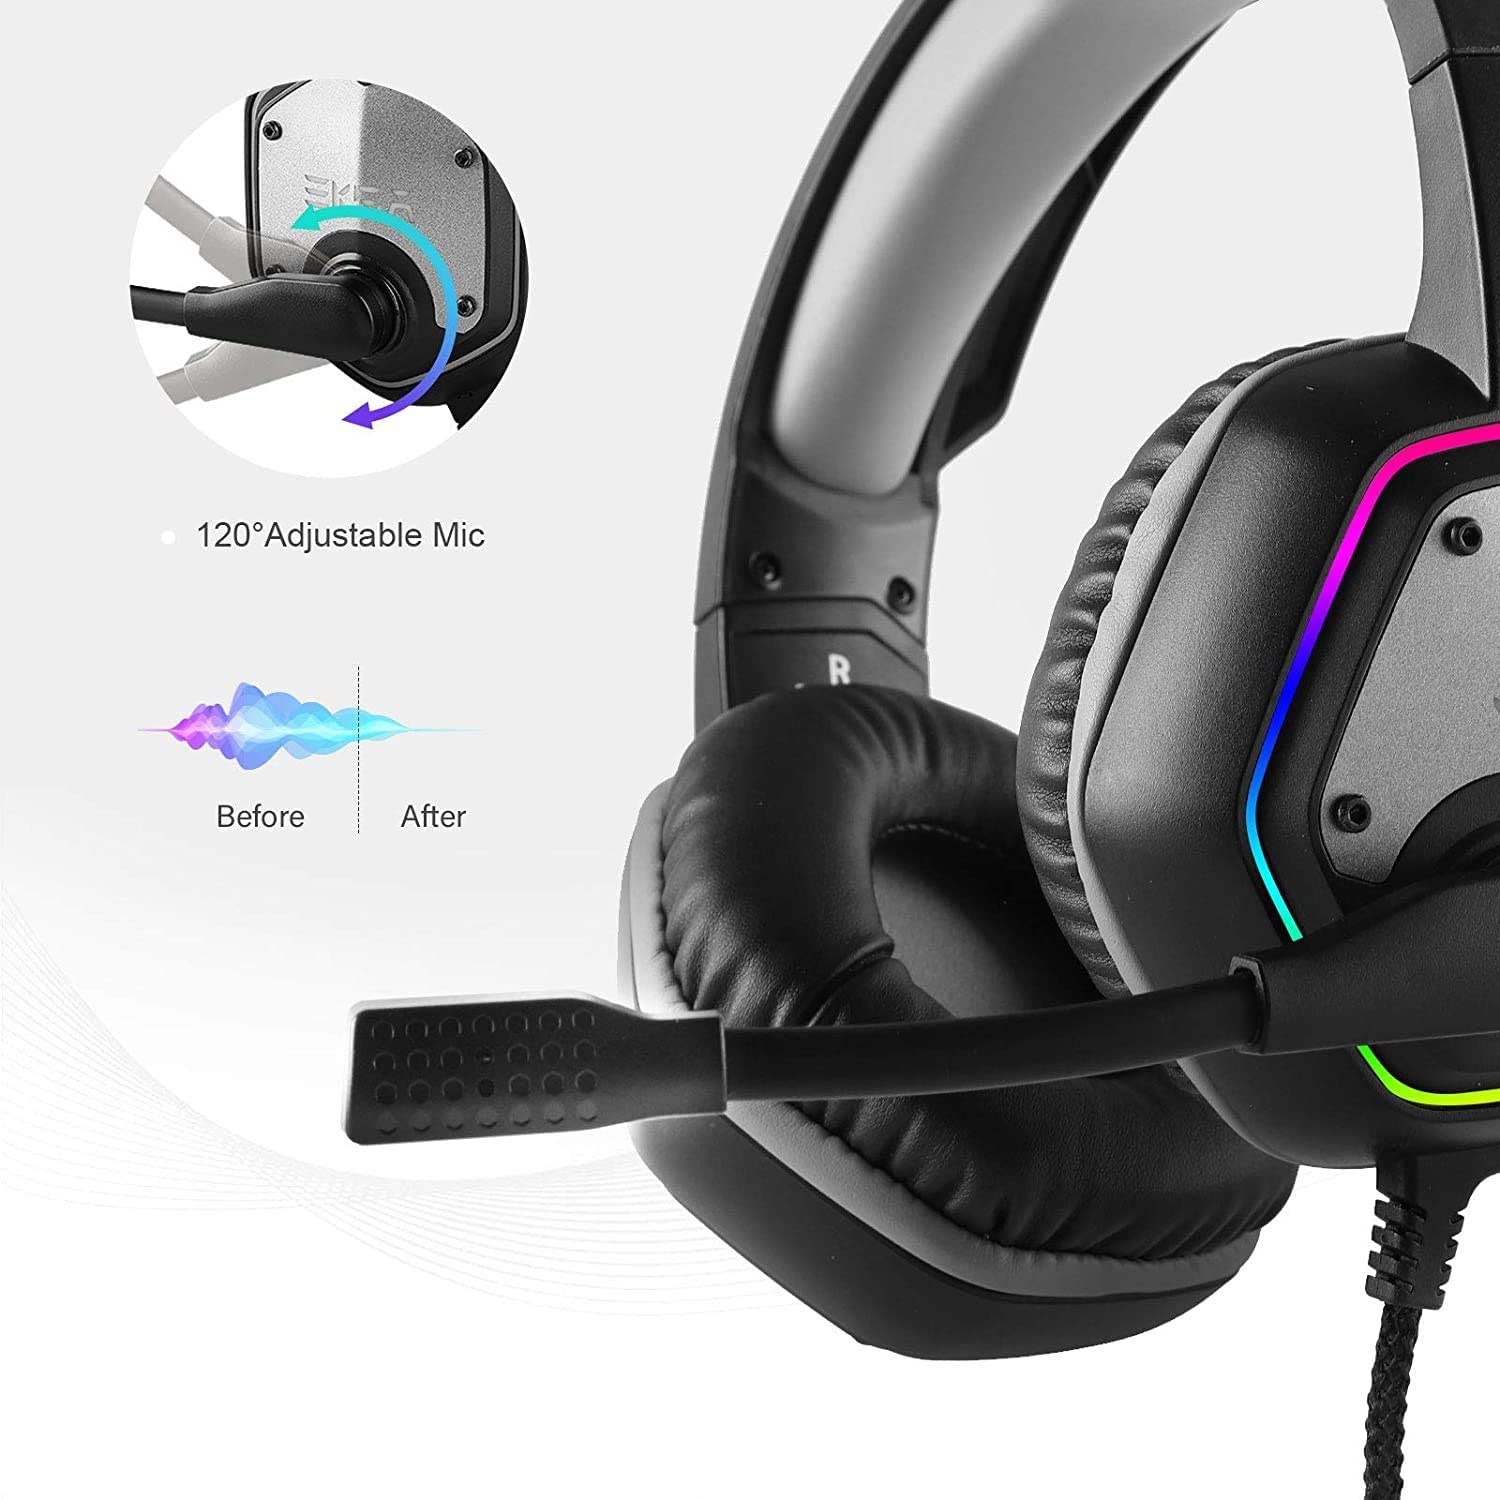 Eksa E1000 RGB USB Gaming Headset for PC and PS4